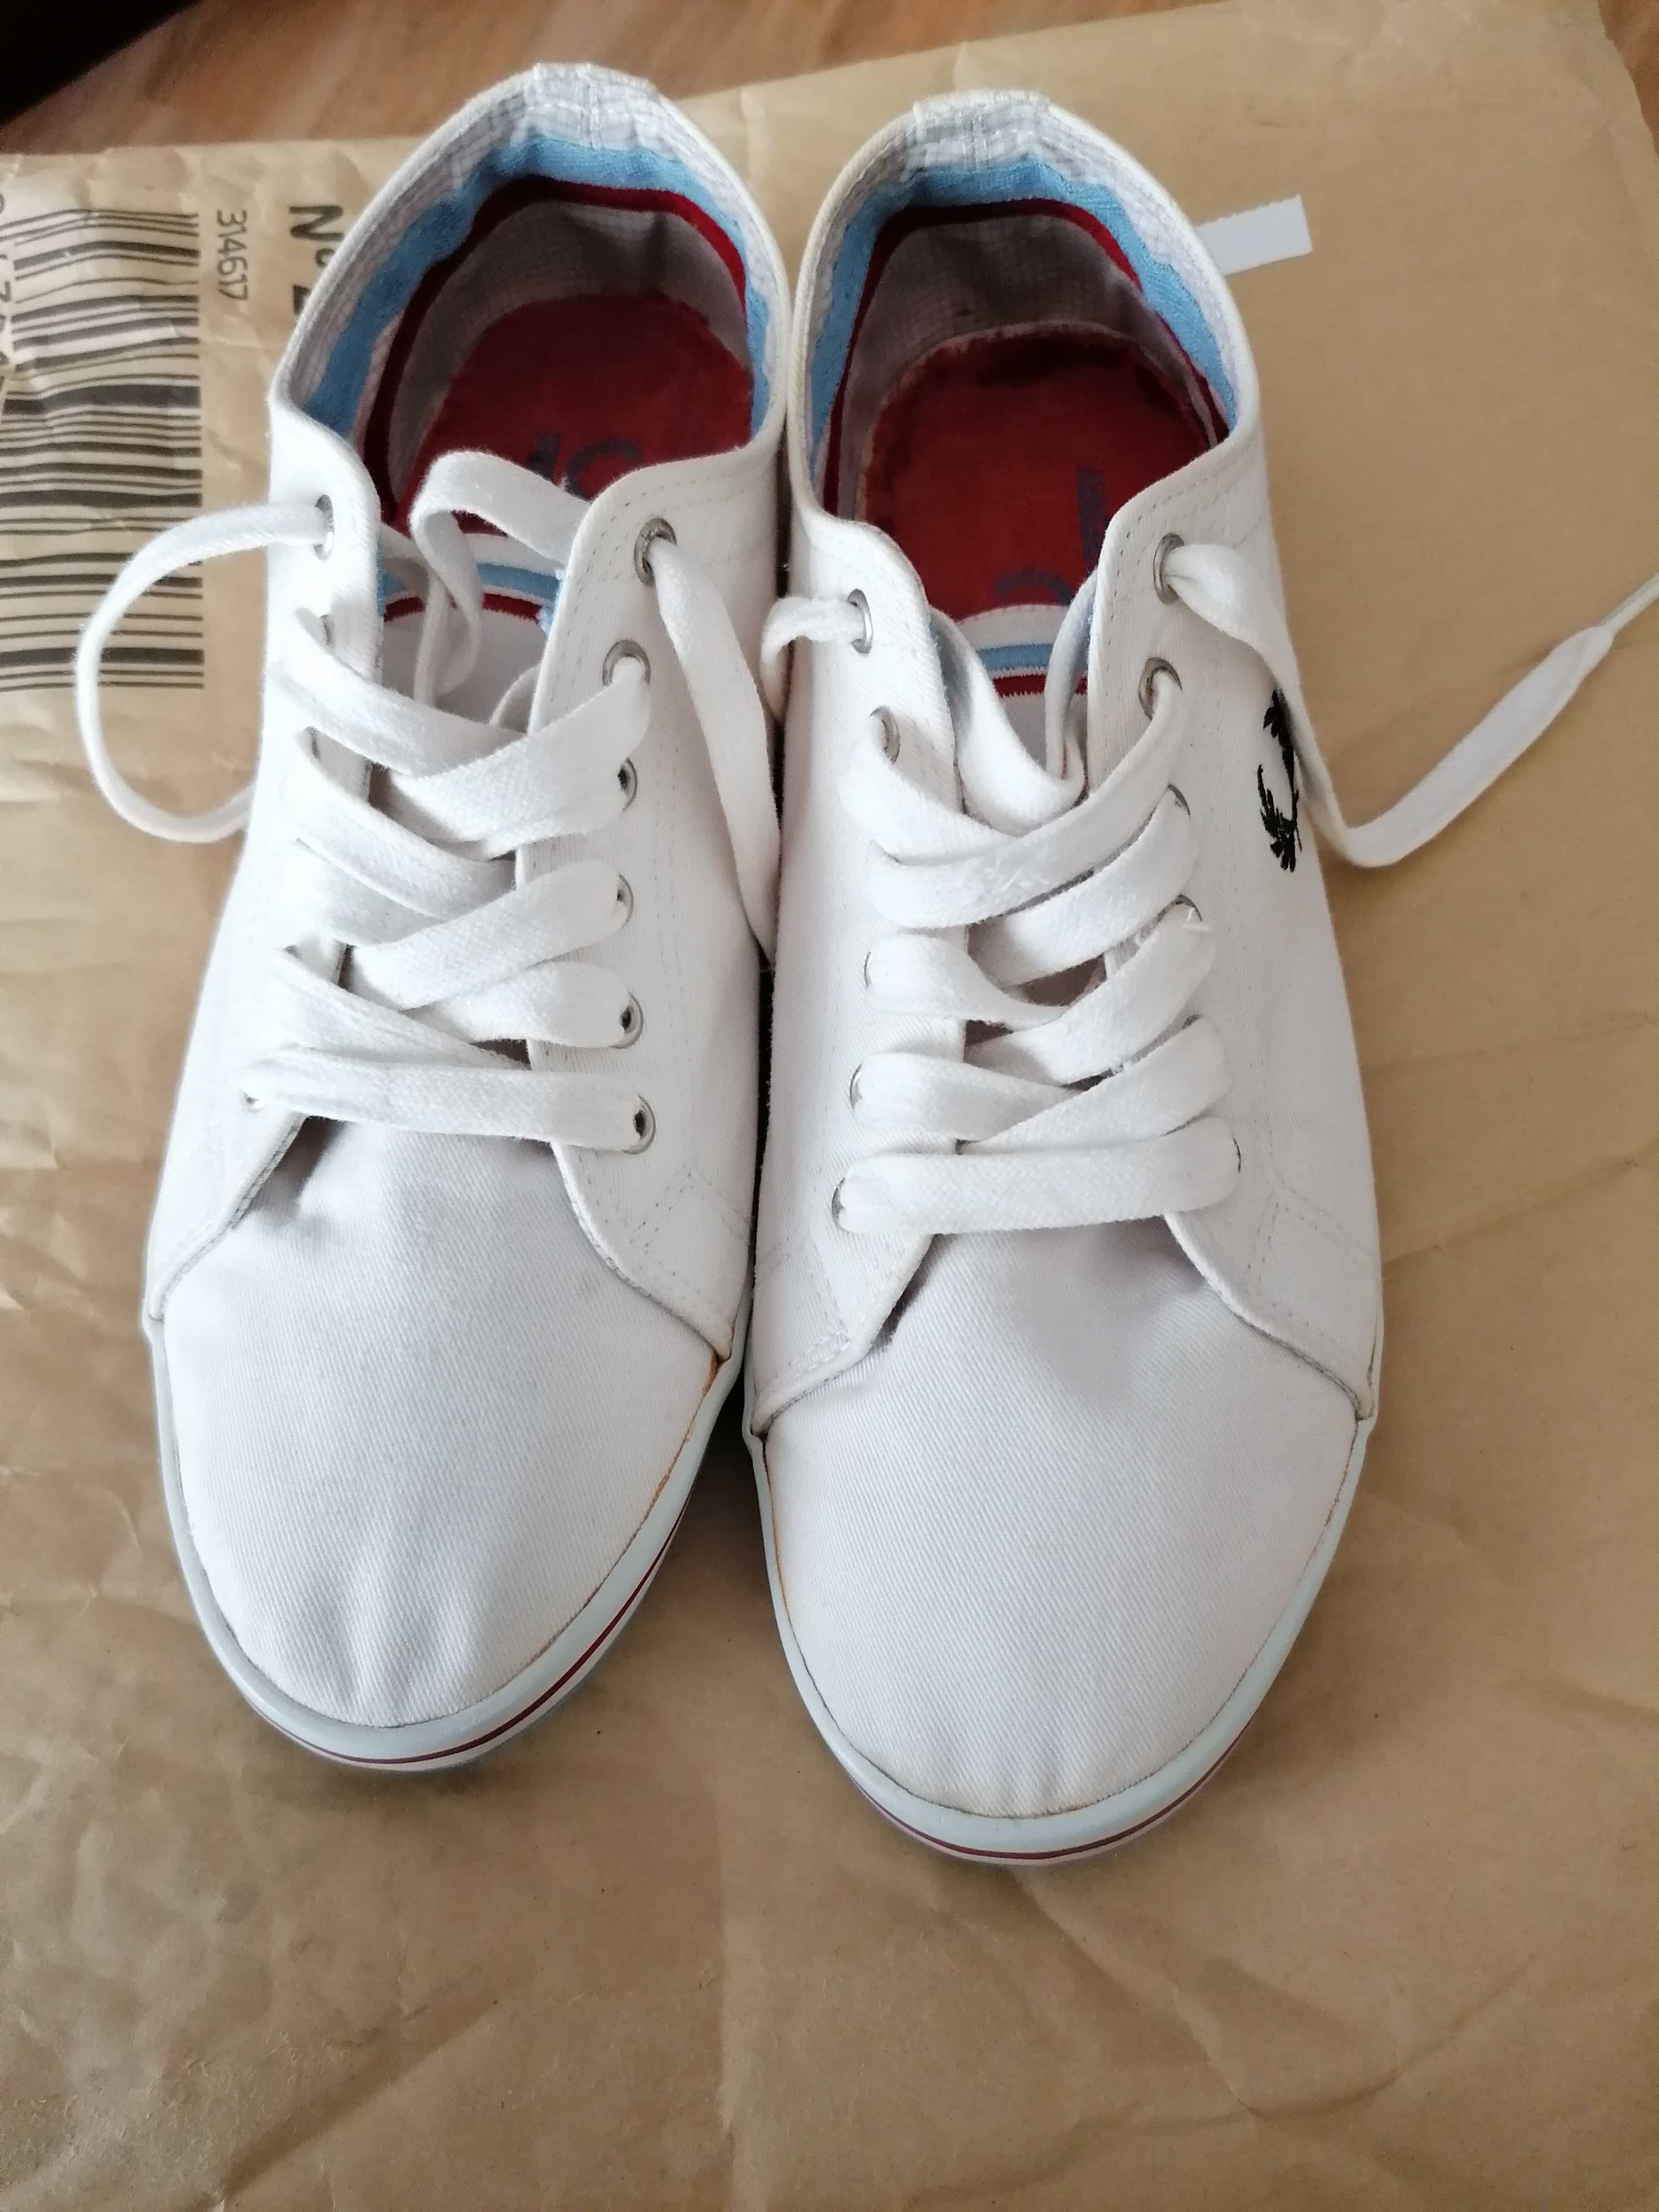 Sapatilhas fred perry t 40